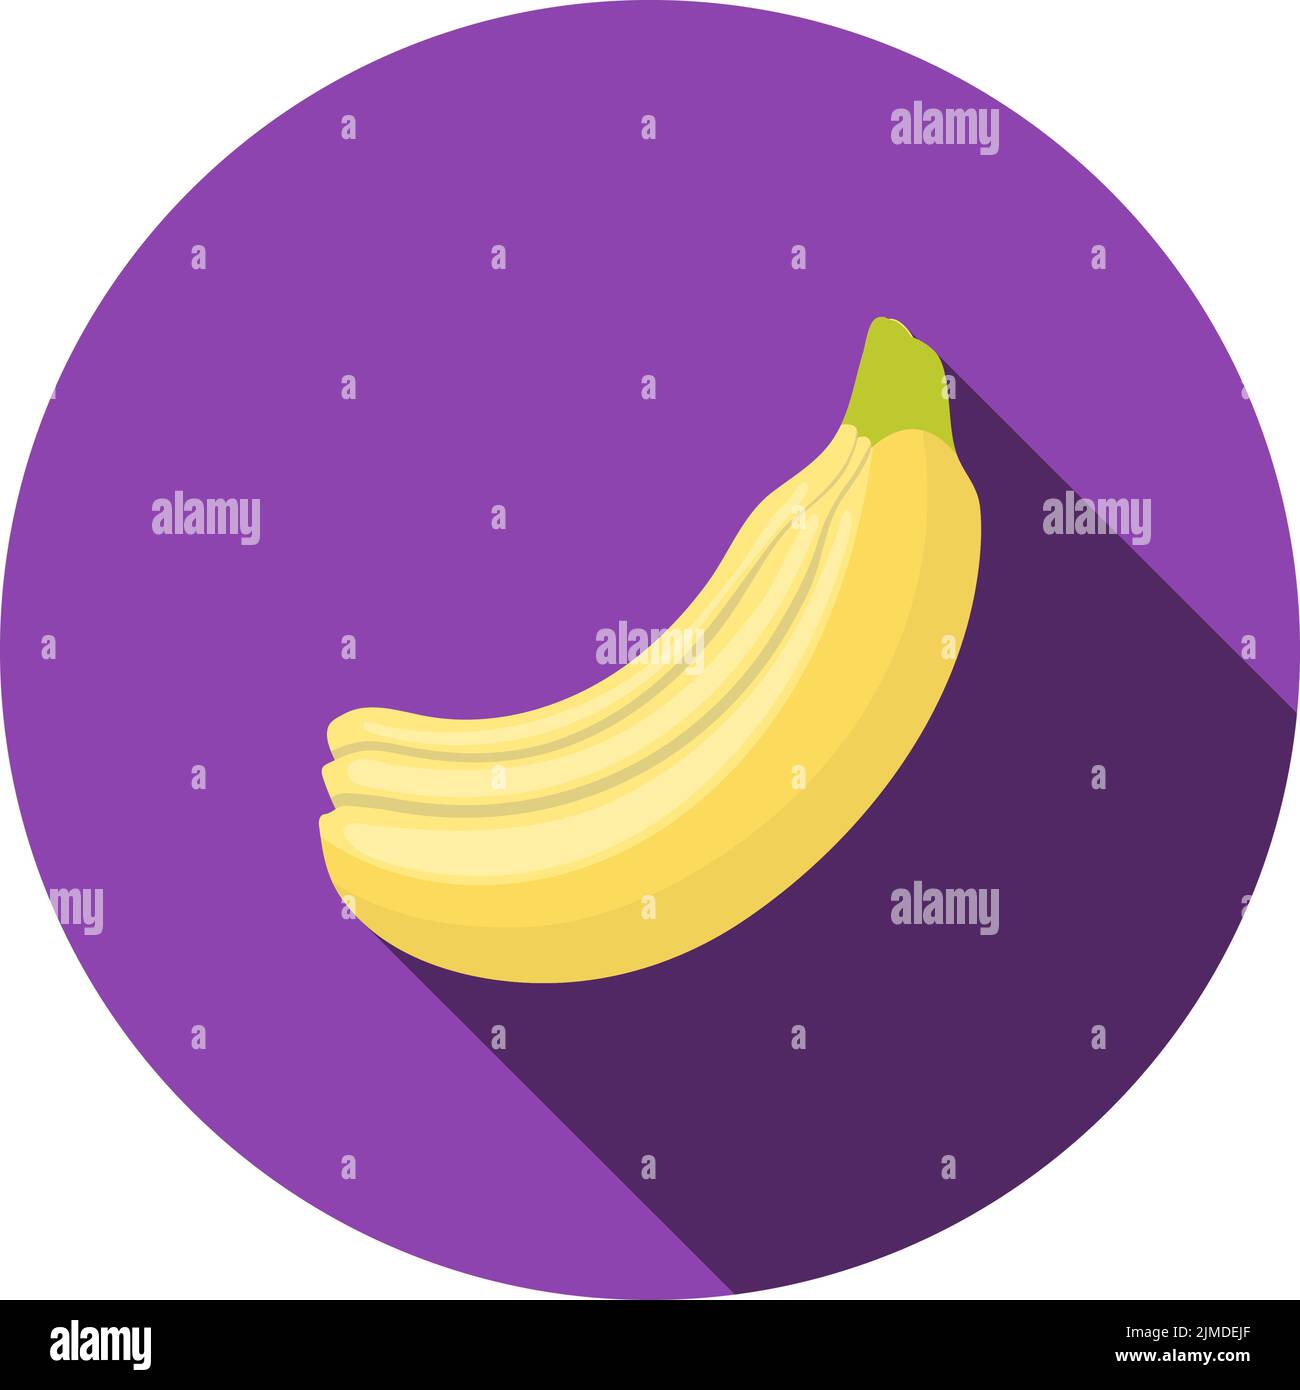 Icon Of Banana In Ui Colors. Flat Circle Stencil Design With Long Shadow. Vector Illustration. Stock Vector